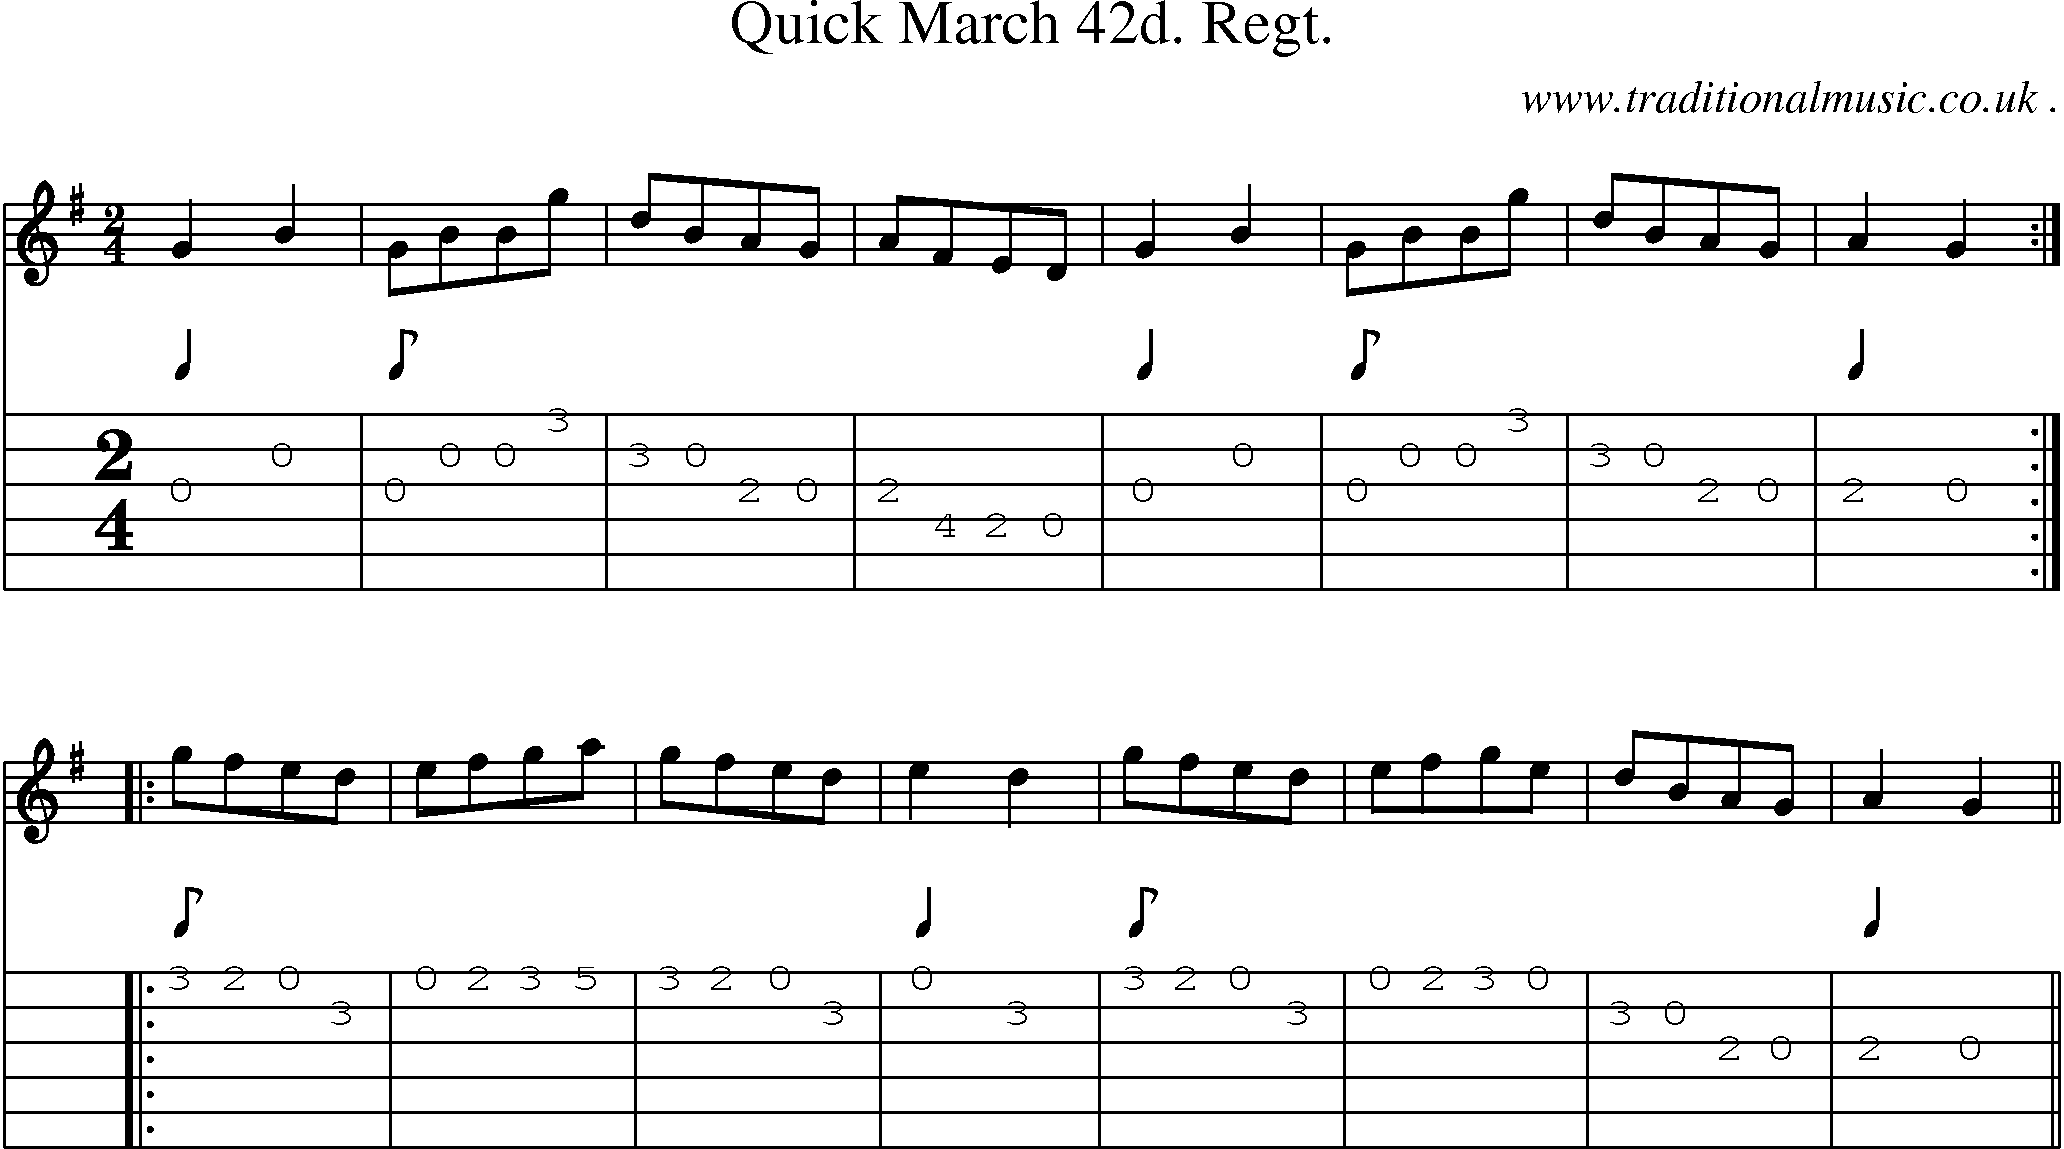 Sheet-music  score, Chords and Guitar Tabs for Quick March 42d Regt